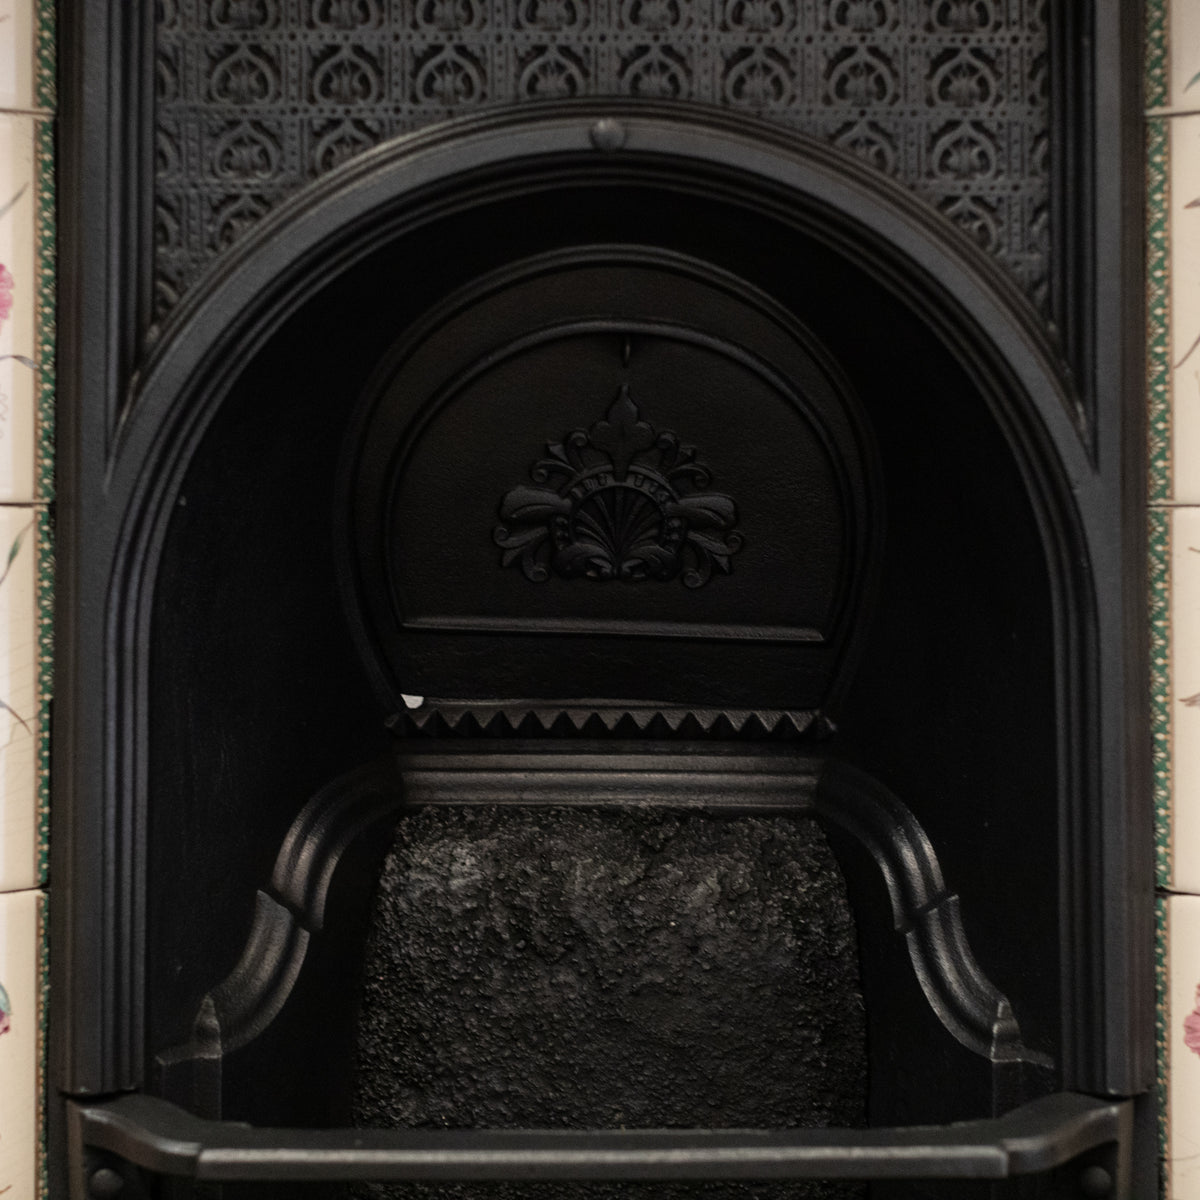 Antique Cast Iron Fireplace Insert With Floral Tiles | The Architectural Forum